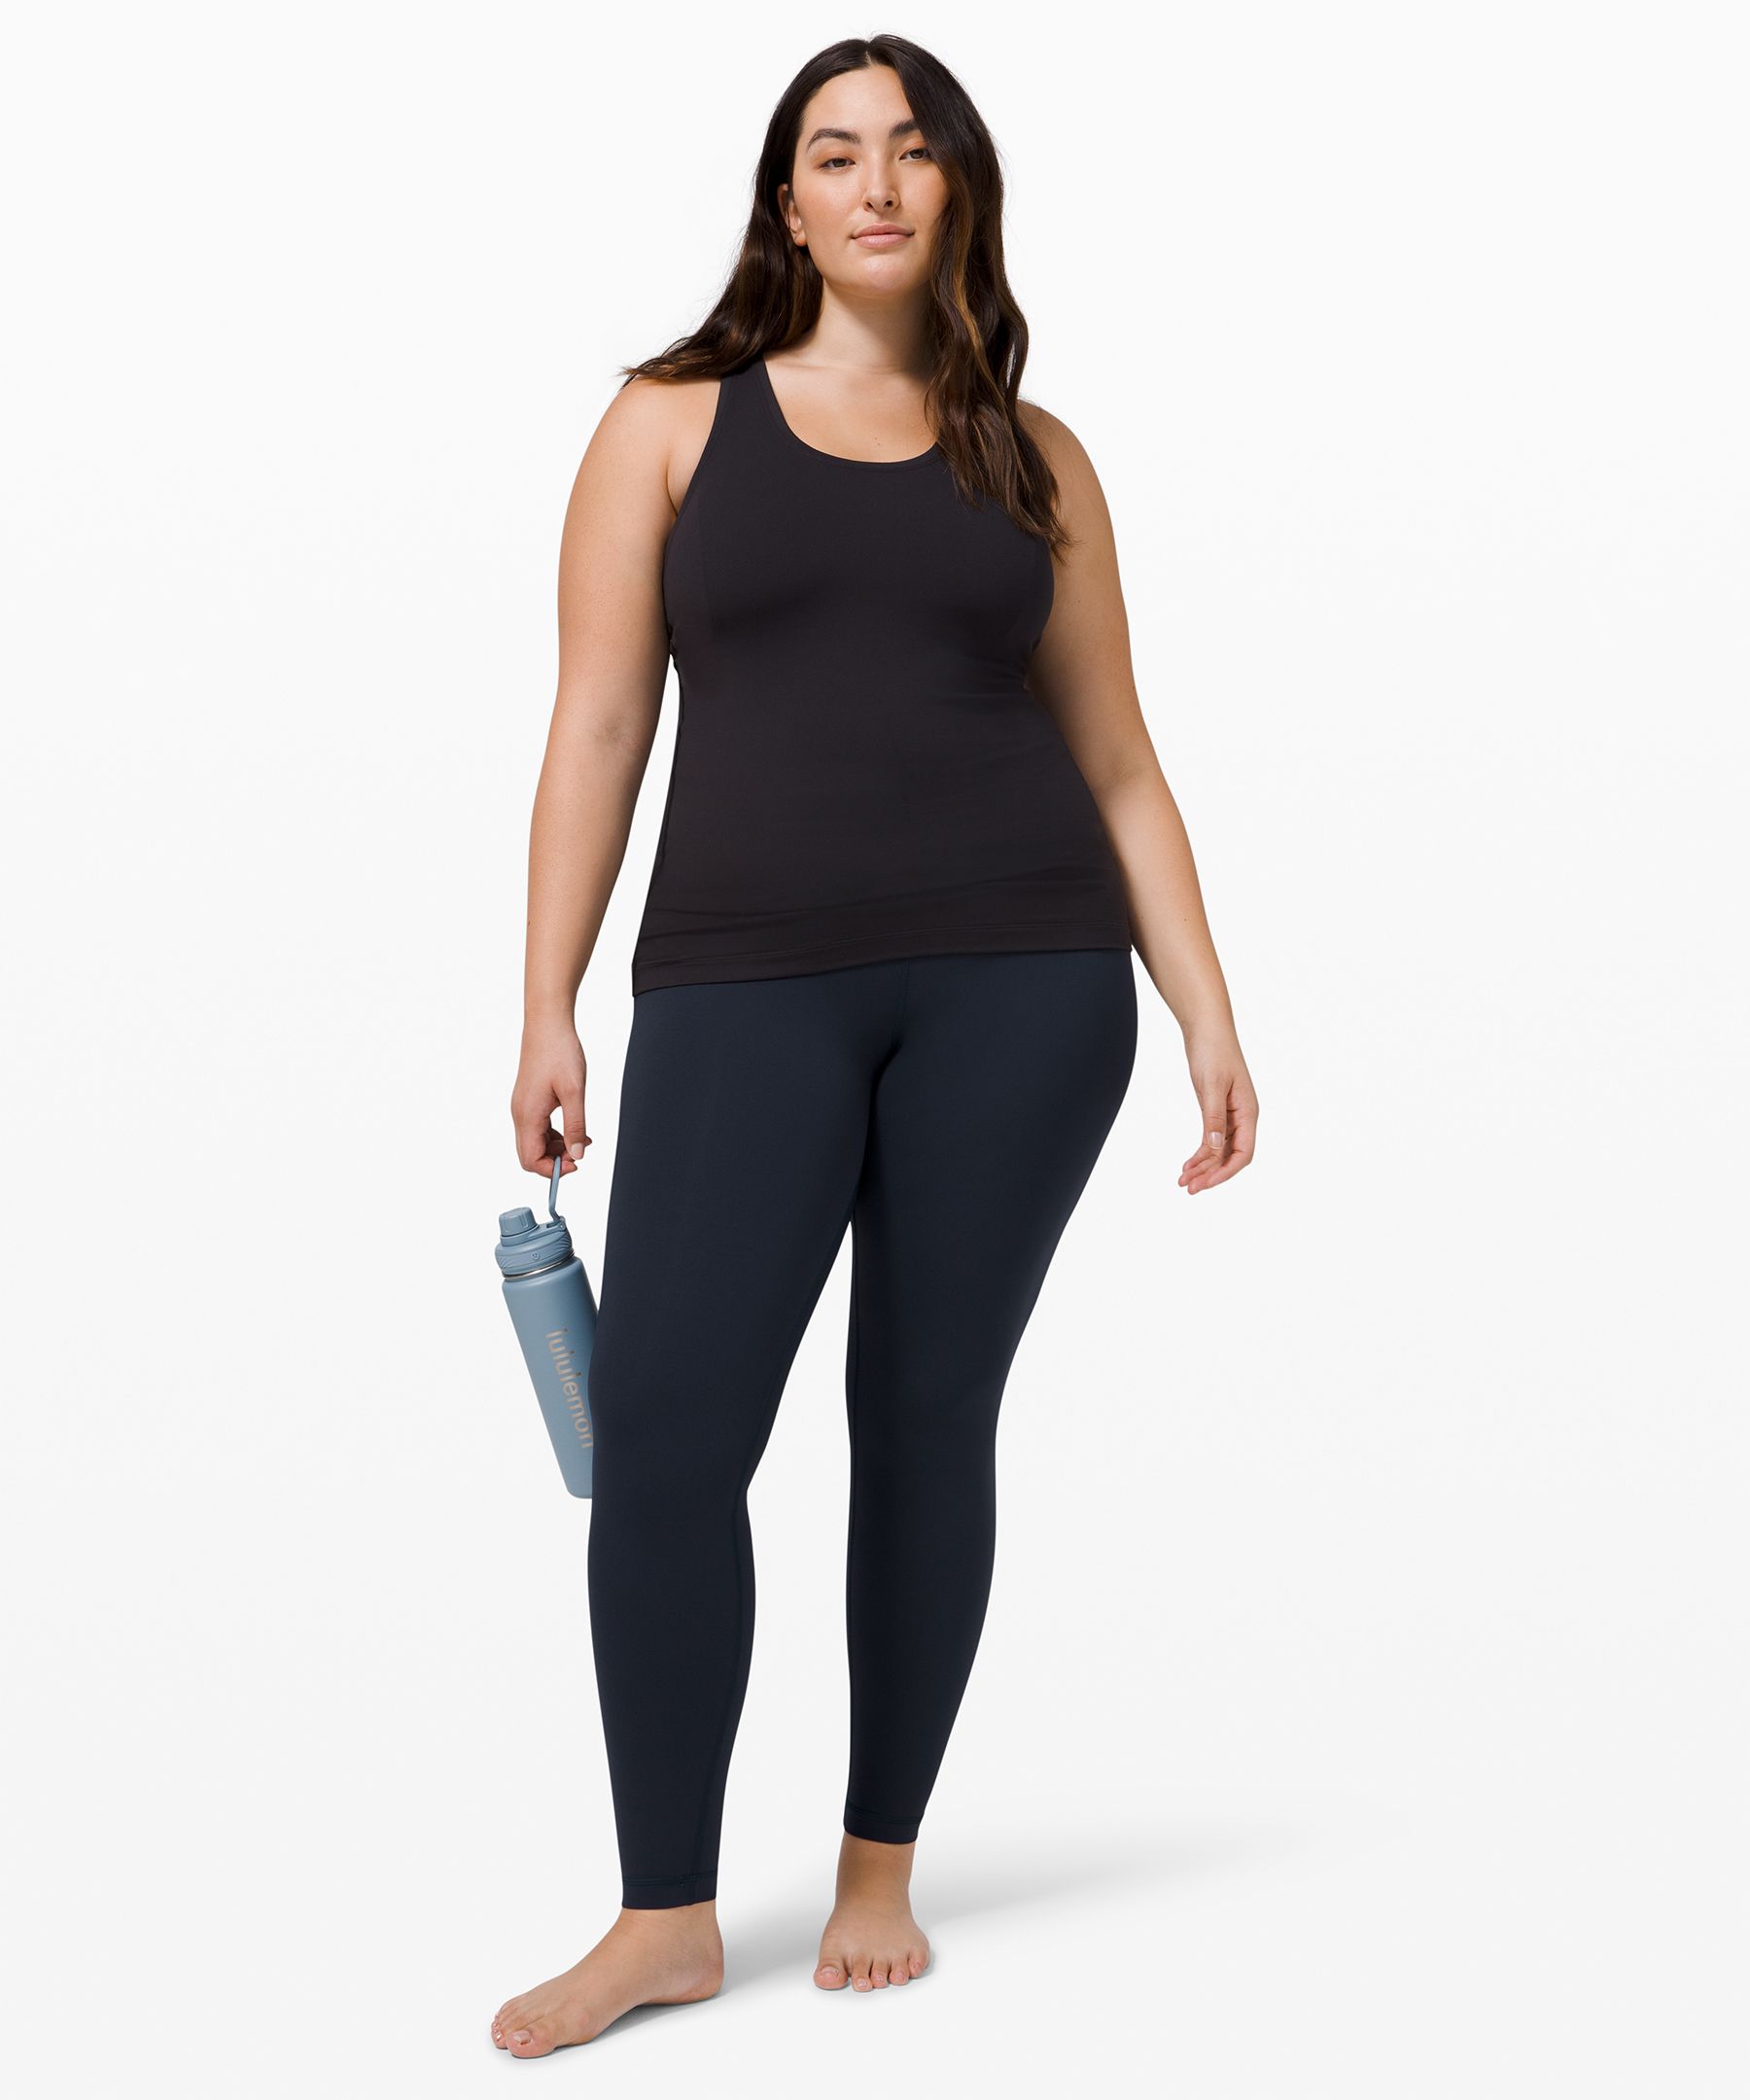 Lululemon Wunder Under High-Rise Tight 28 Shine Full-On Luxtreme Size 2  Black - $63 (35% Off Retail) - From Rebel